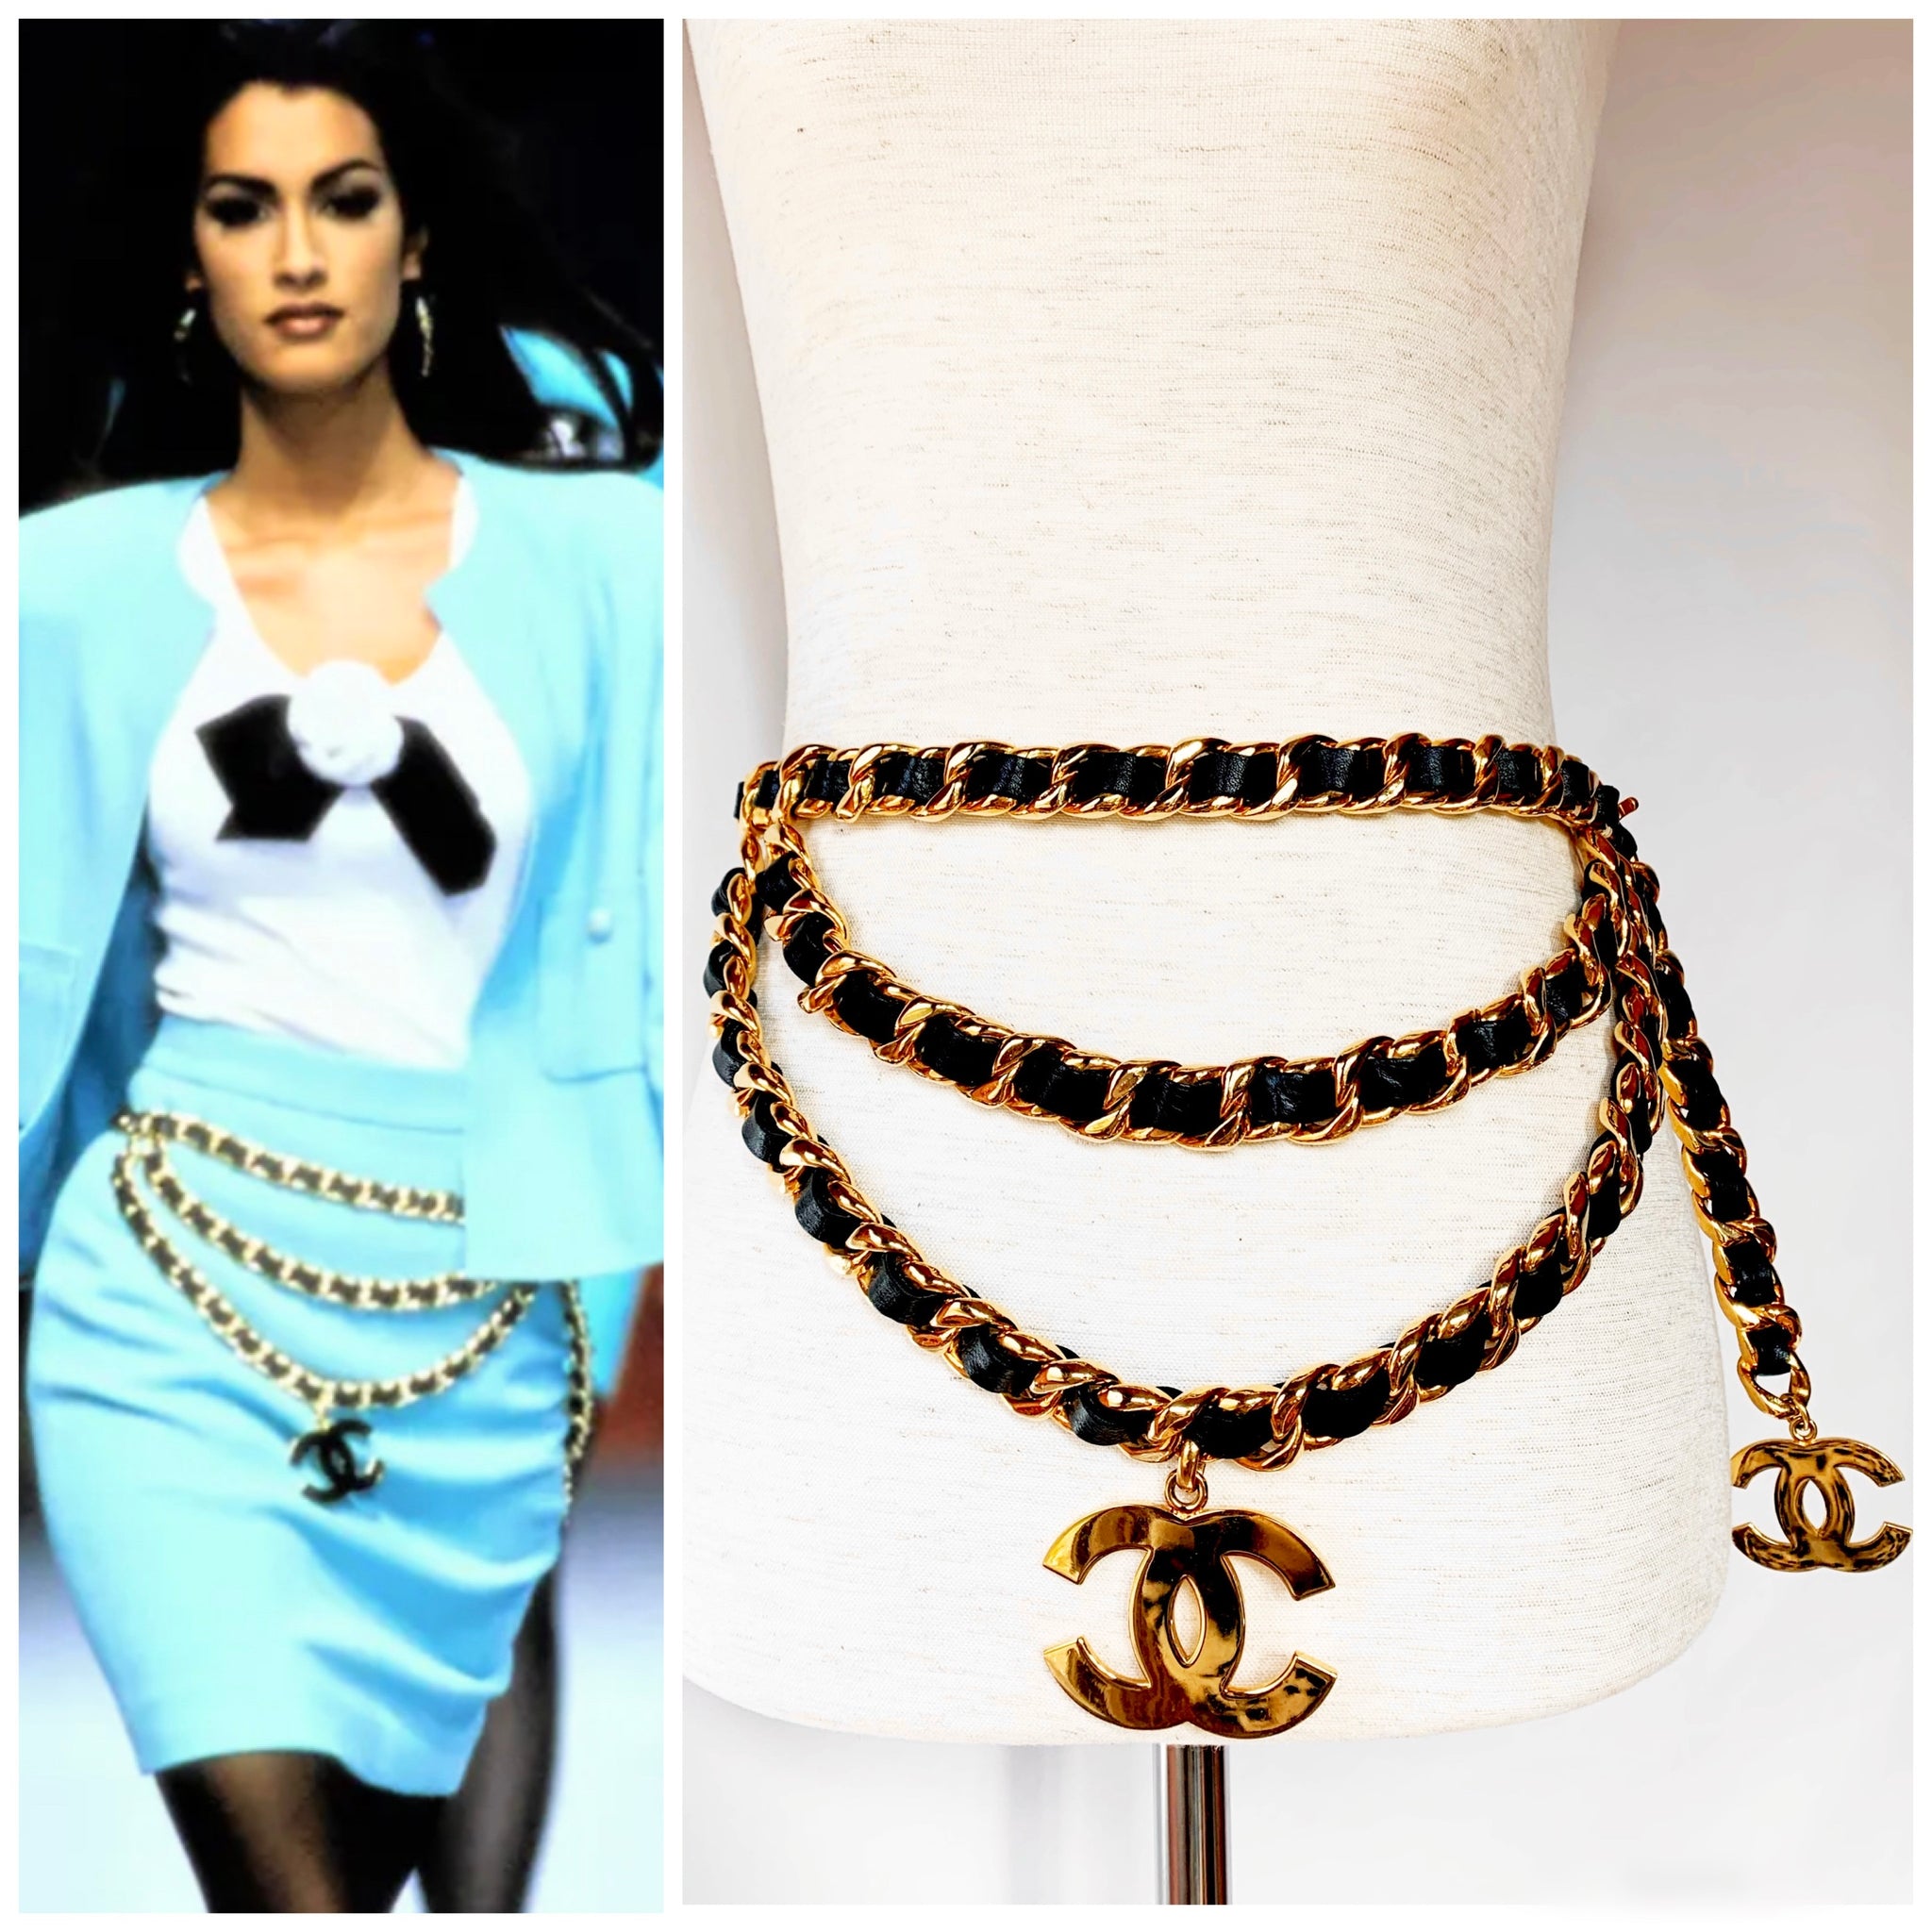 Chanel // Fall 2006 Gold-Tone Chain Link Belt – VSP Consignment